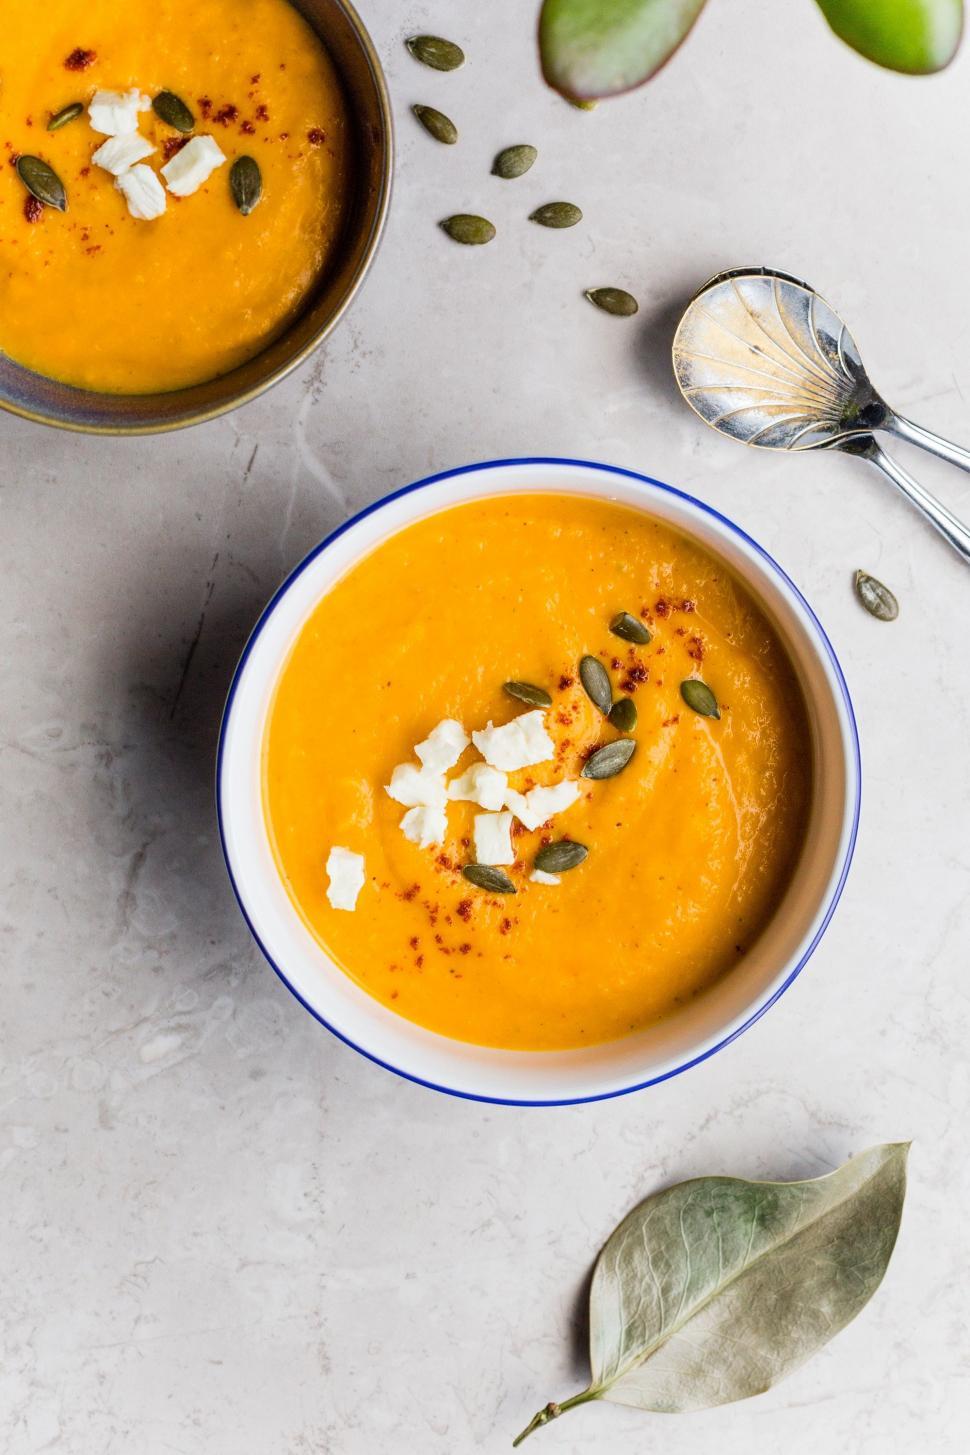 Free Image of Two Bowls of Carrot Soup on a Table 